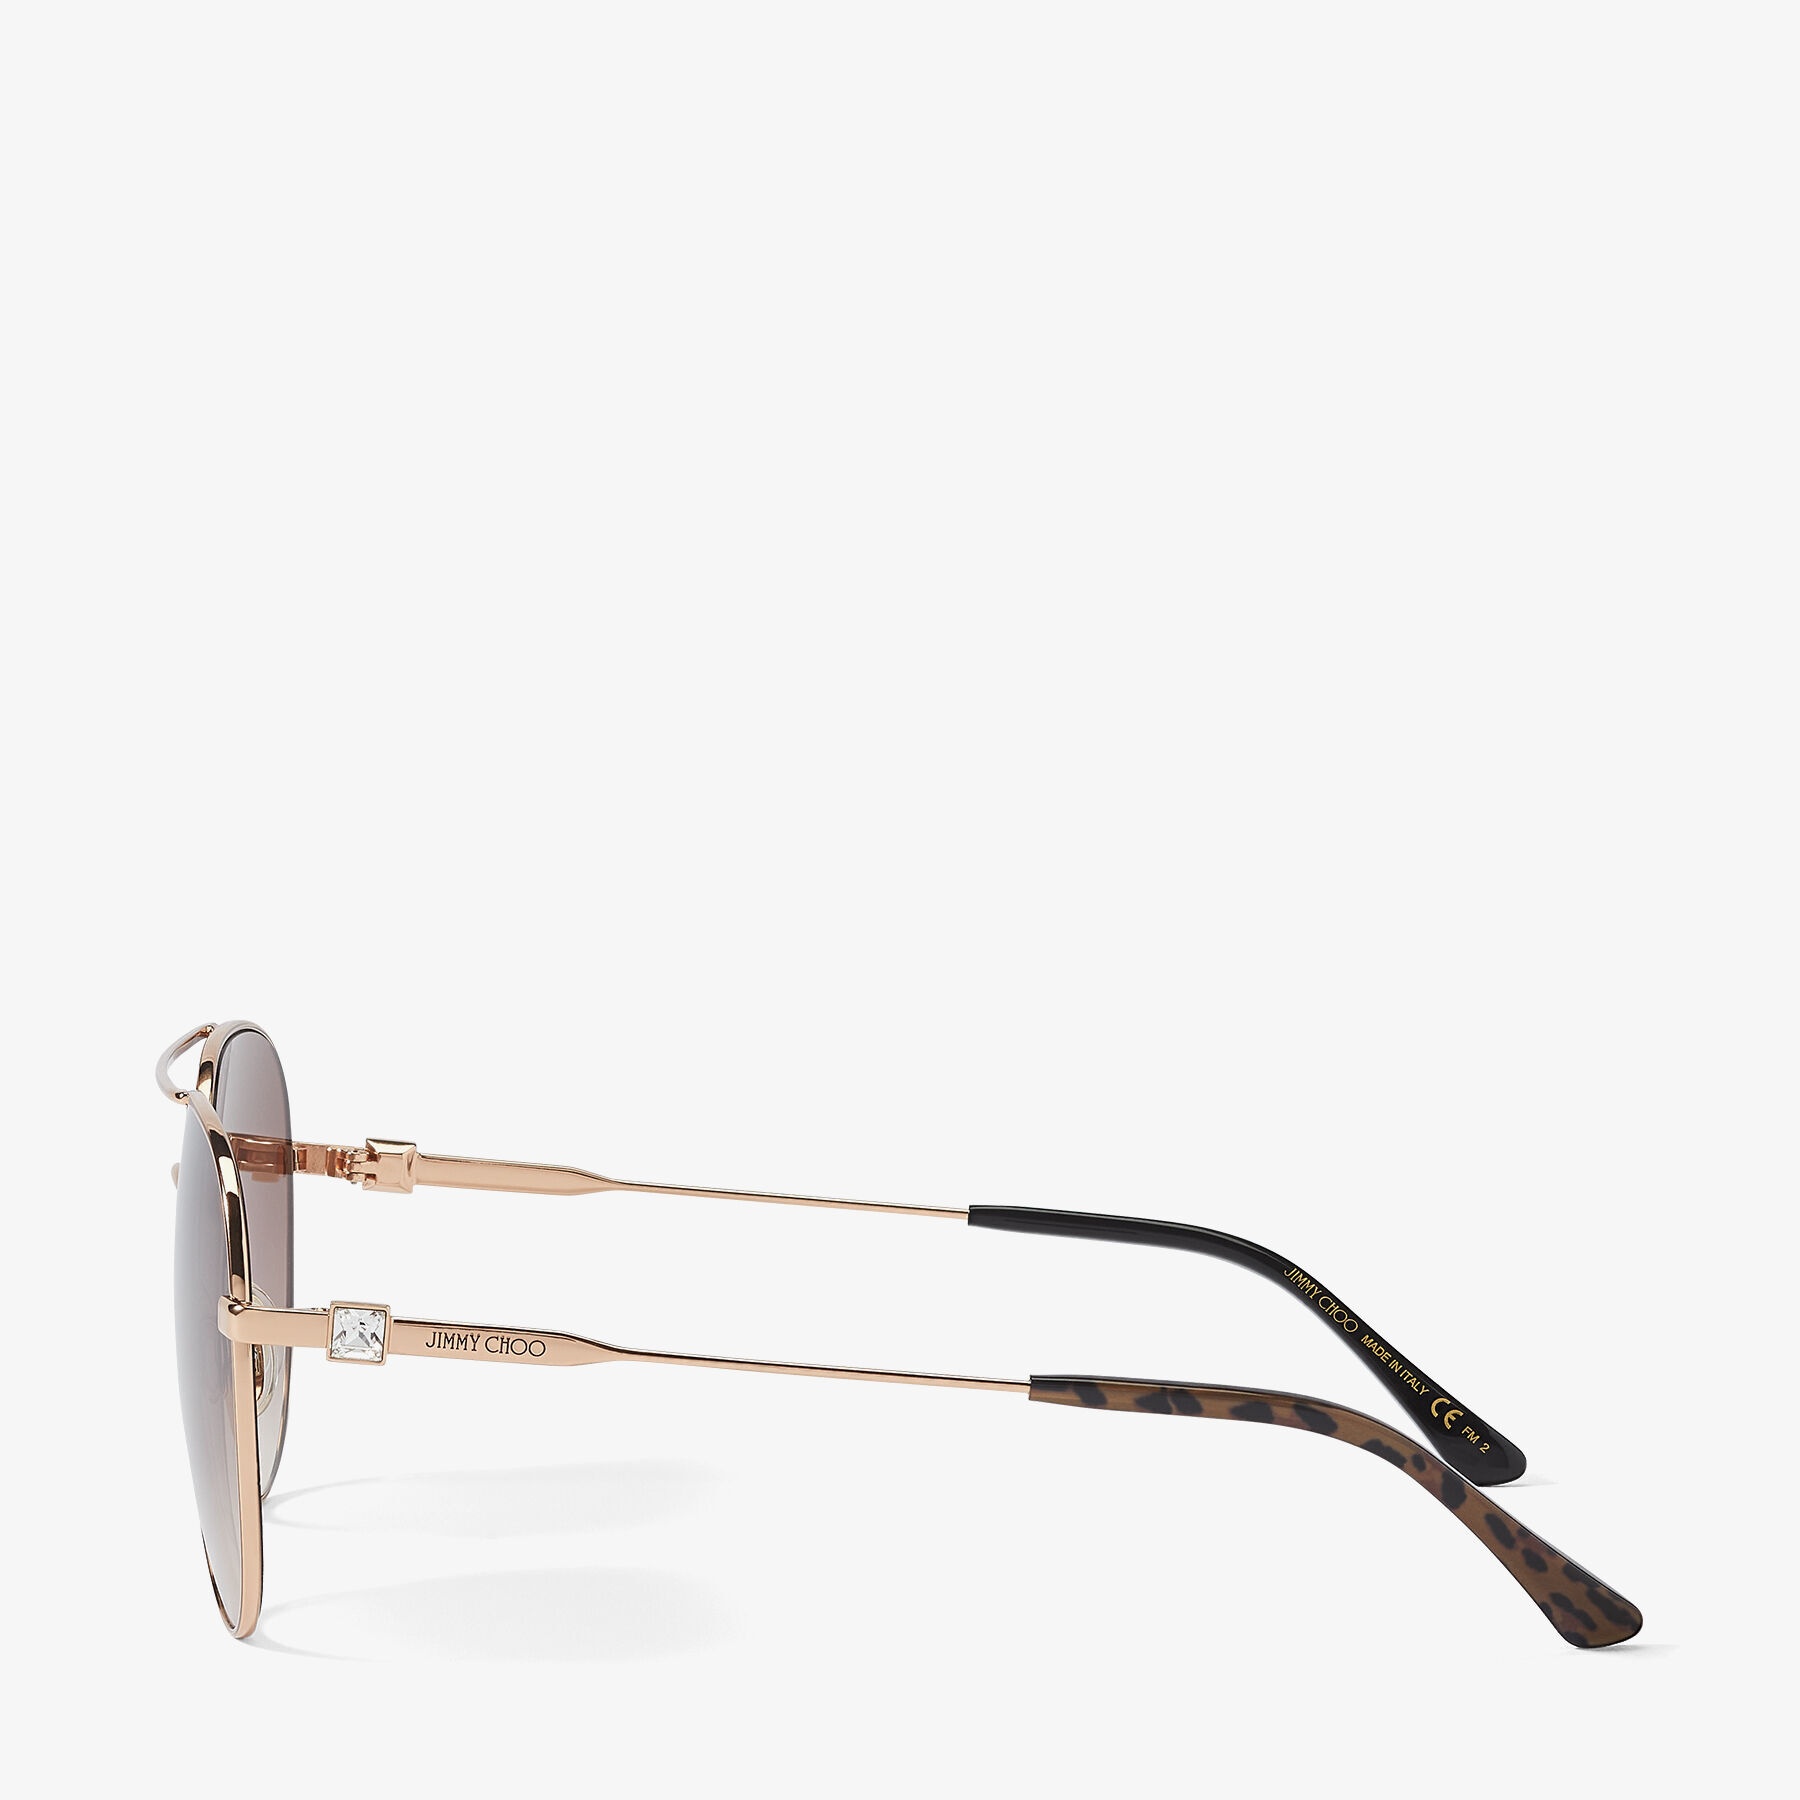 Olly
Copper Gold Aviator Sunglasses with Brown Shaded Lenses and Crystal Embellishment - 2